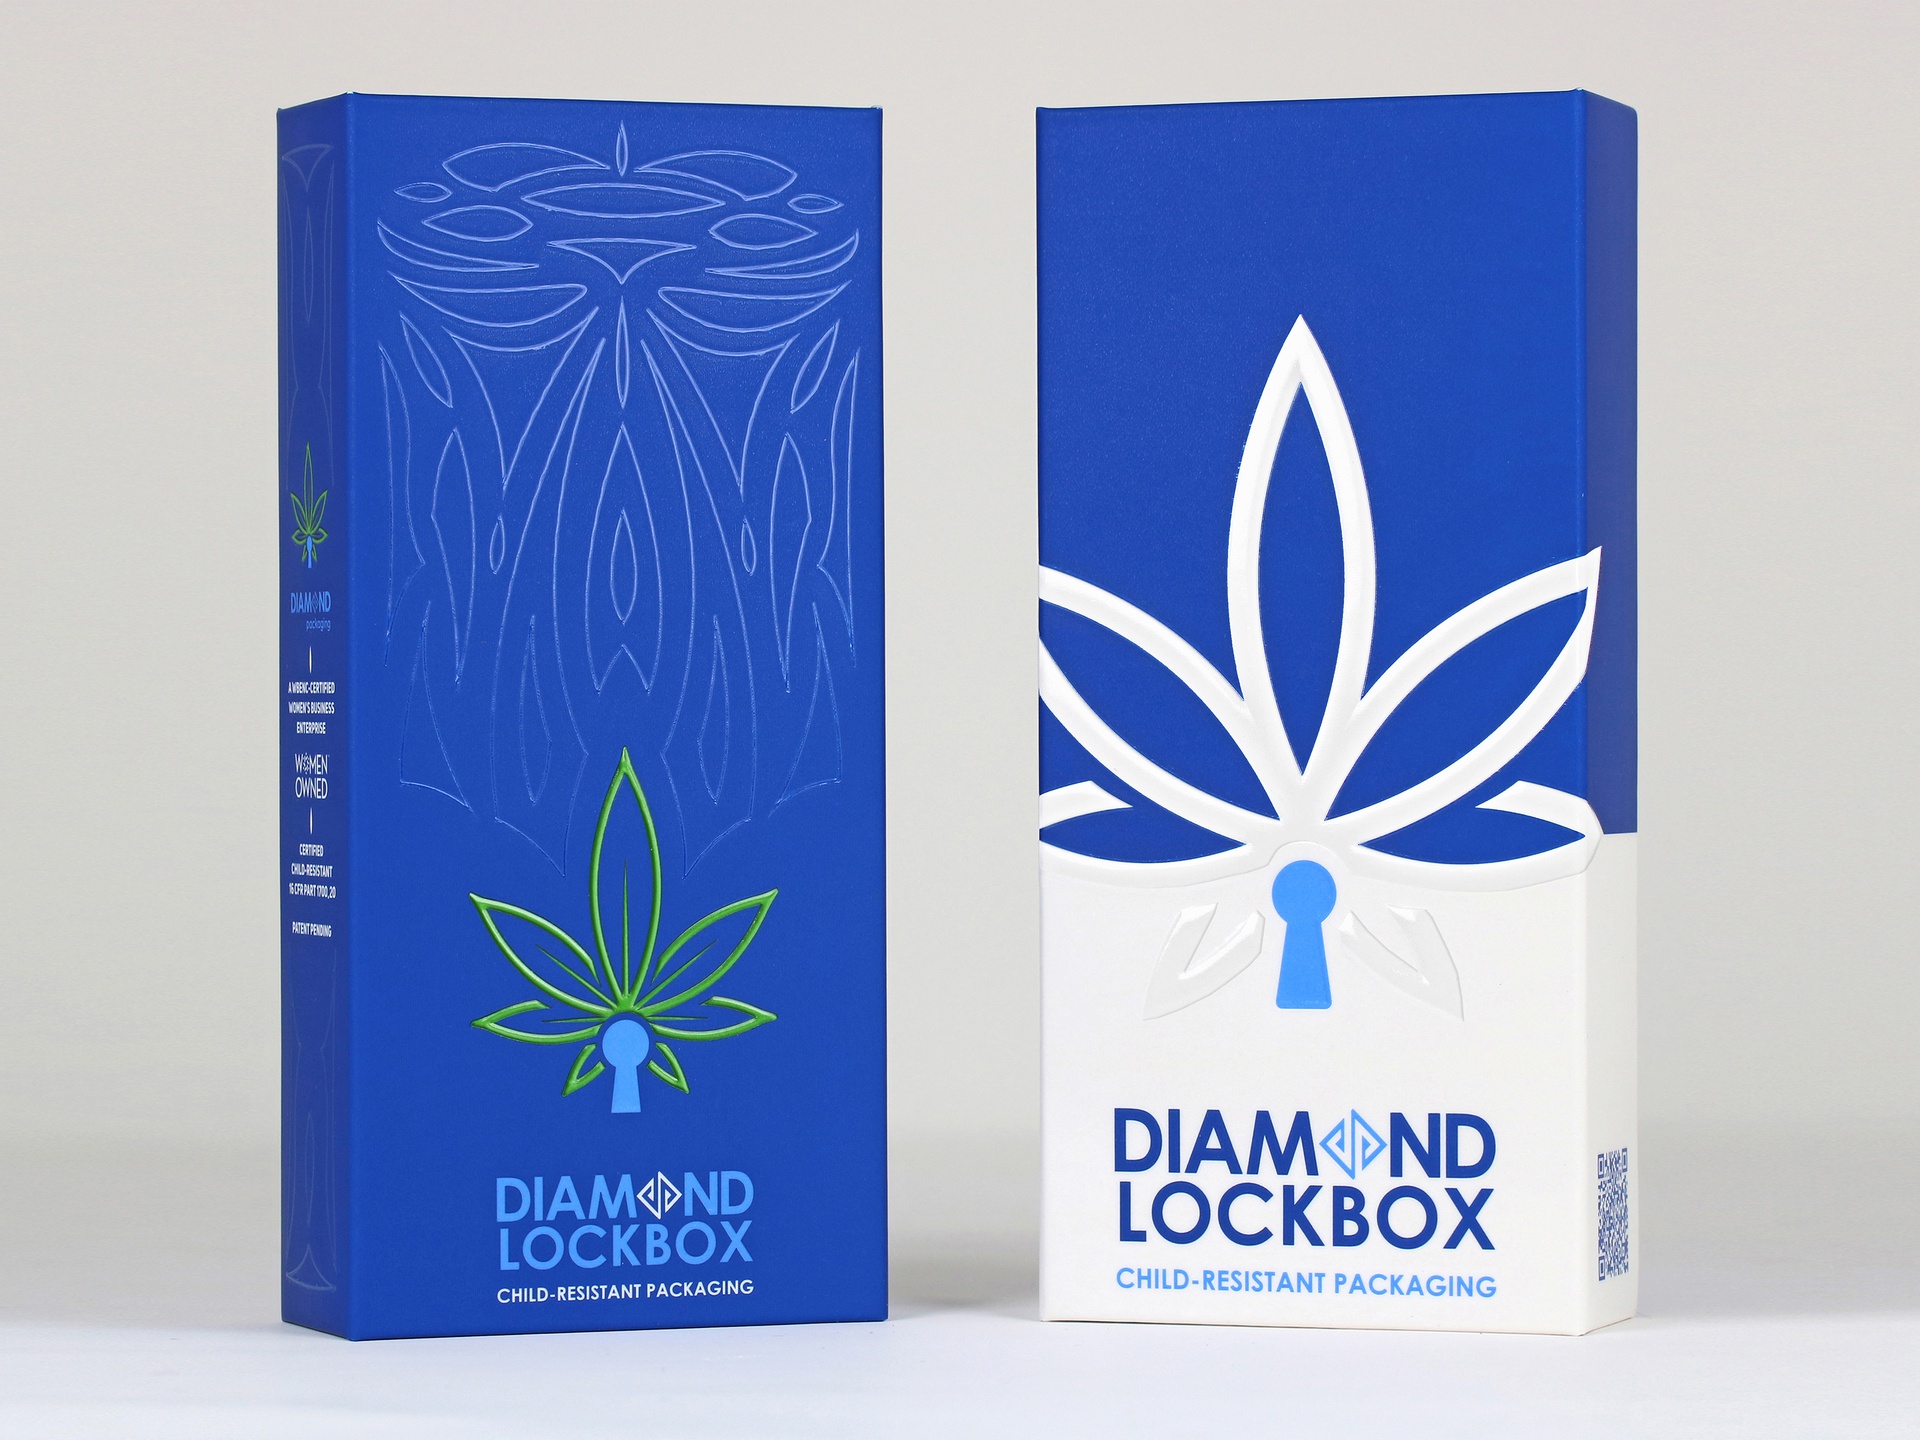 Diamond Lockbox™ Certified Child-Resistant (CR) Cannabis Packaging for Medical and Recreational Marijuana Products